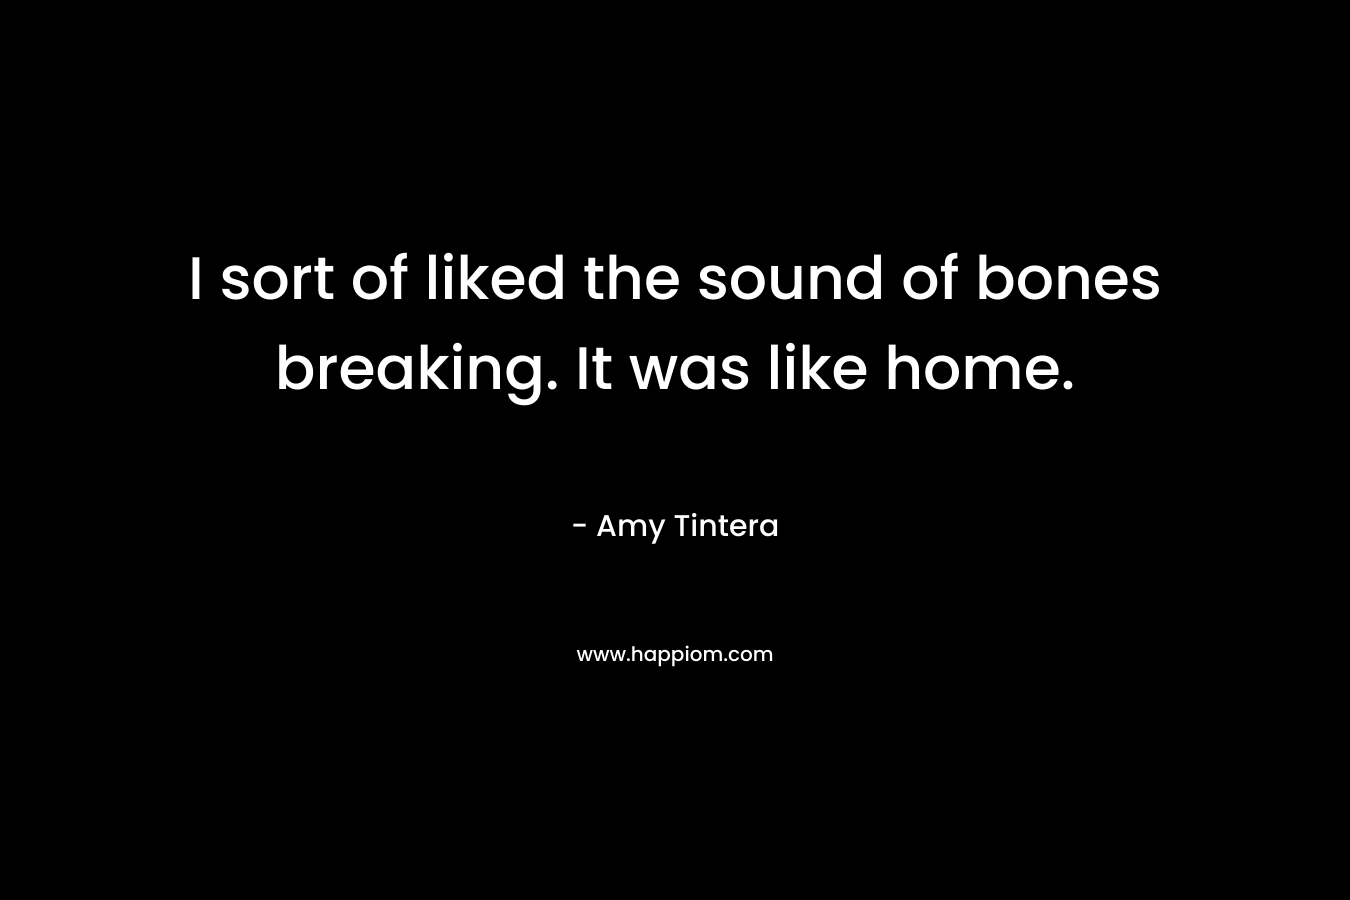 I sort of liked the sound of bones breaking. It was like home.